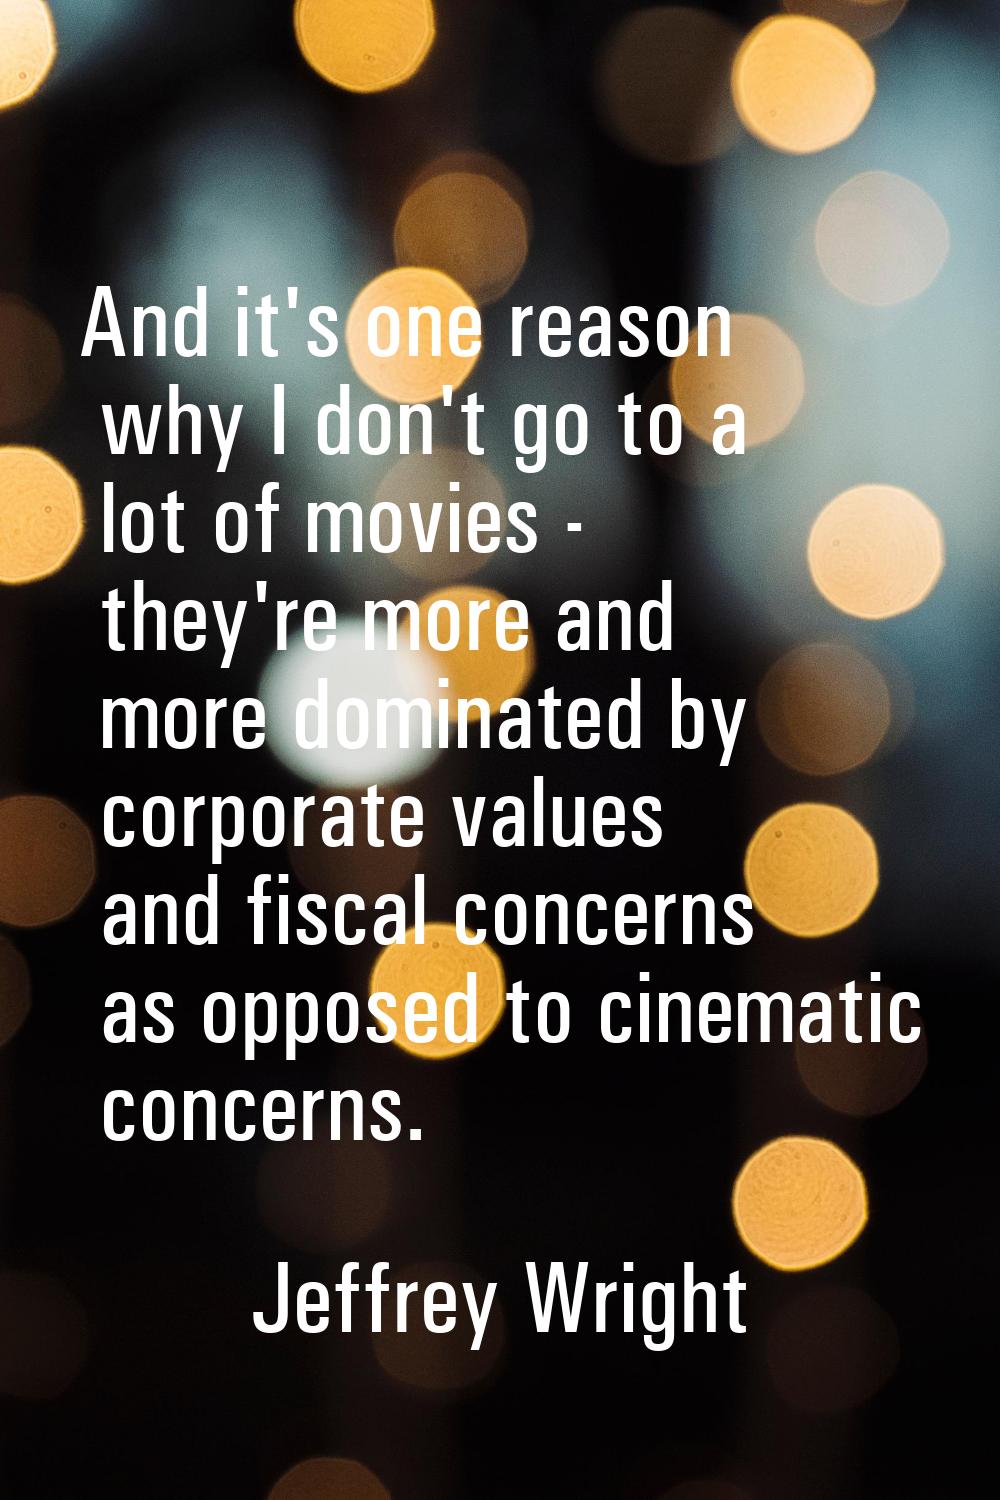 And it's one reason why I don't go to a lot of movies - they're more and more dominated by corporat